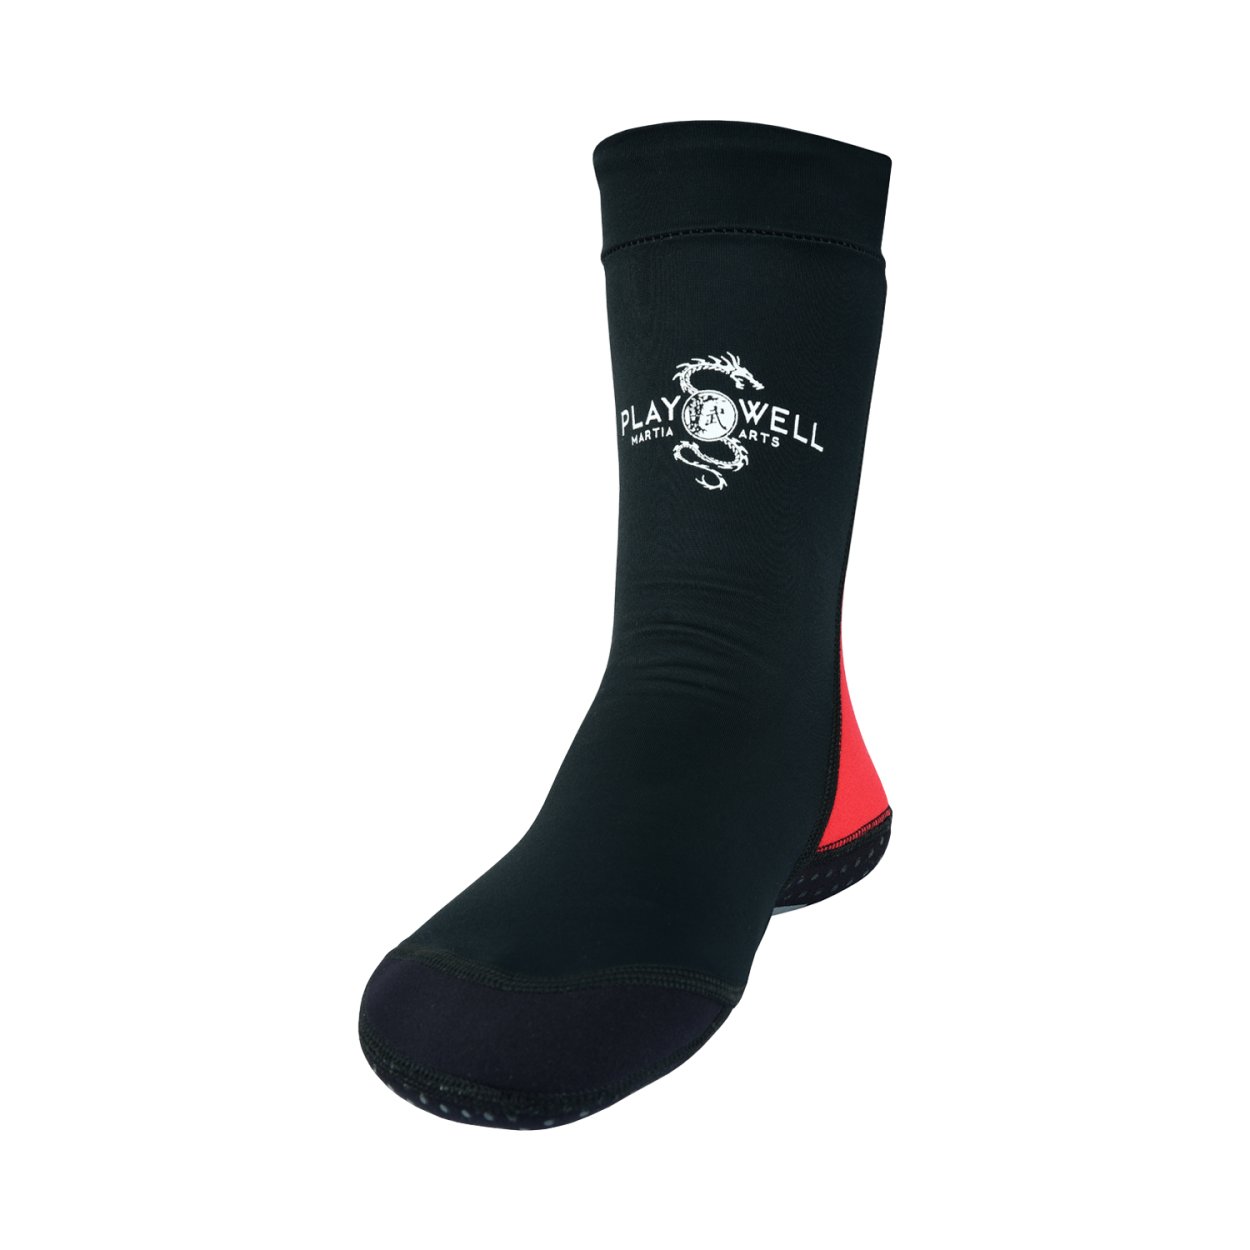 Martial Arts School Tatami Mat Training Socks - Black/Red - £18.99 :  Playwell Martial Arts, The UK's Largest Online Martial Arts Superstore